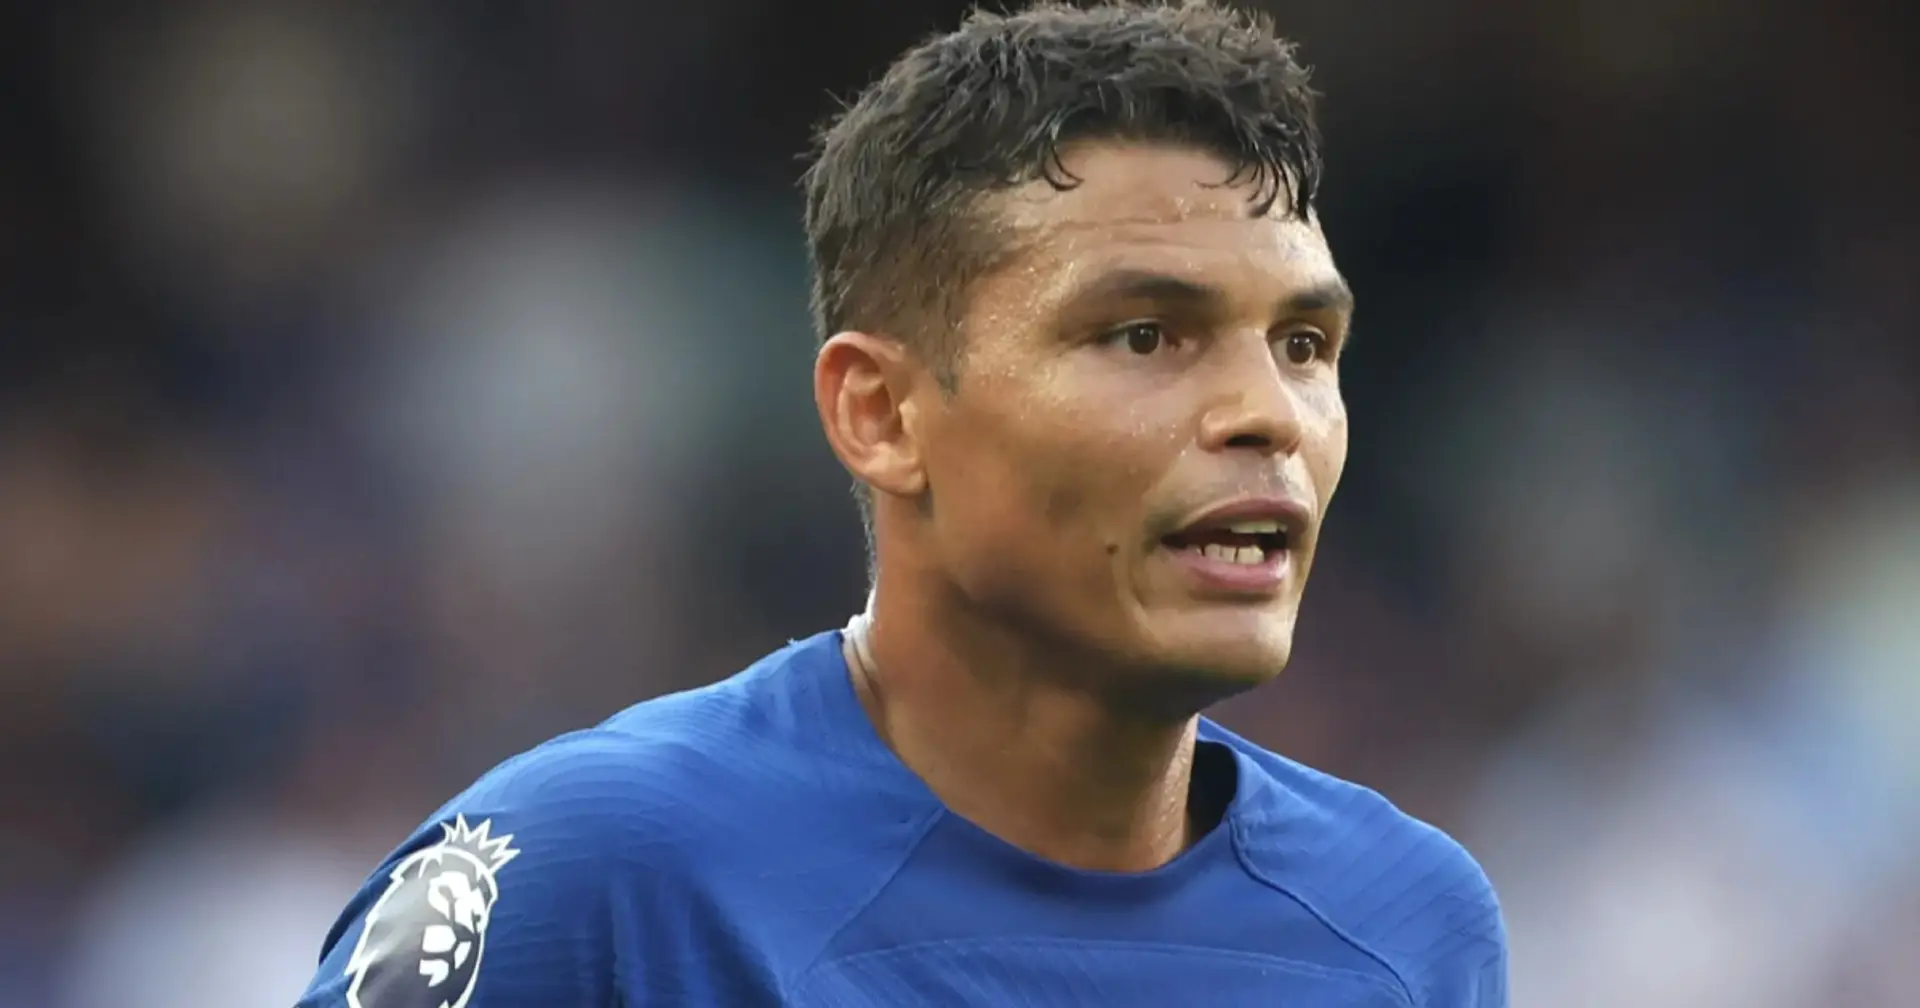 What are Thiago Silva's plans after Chelsea? Romano shares what he knows